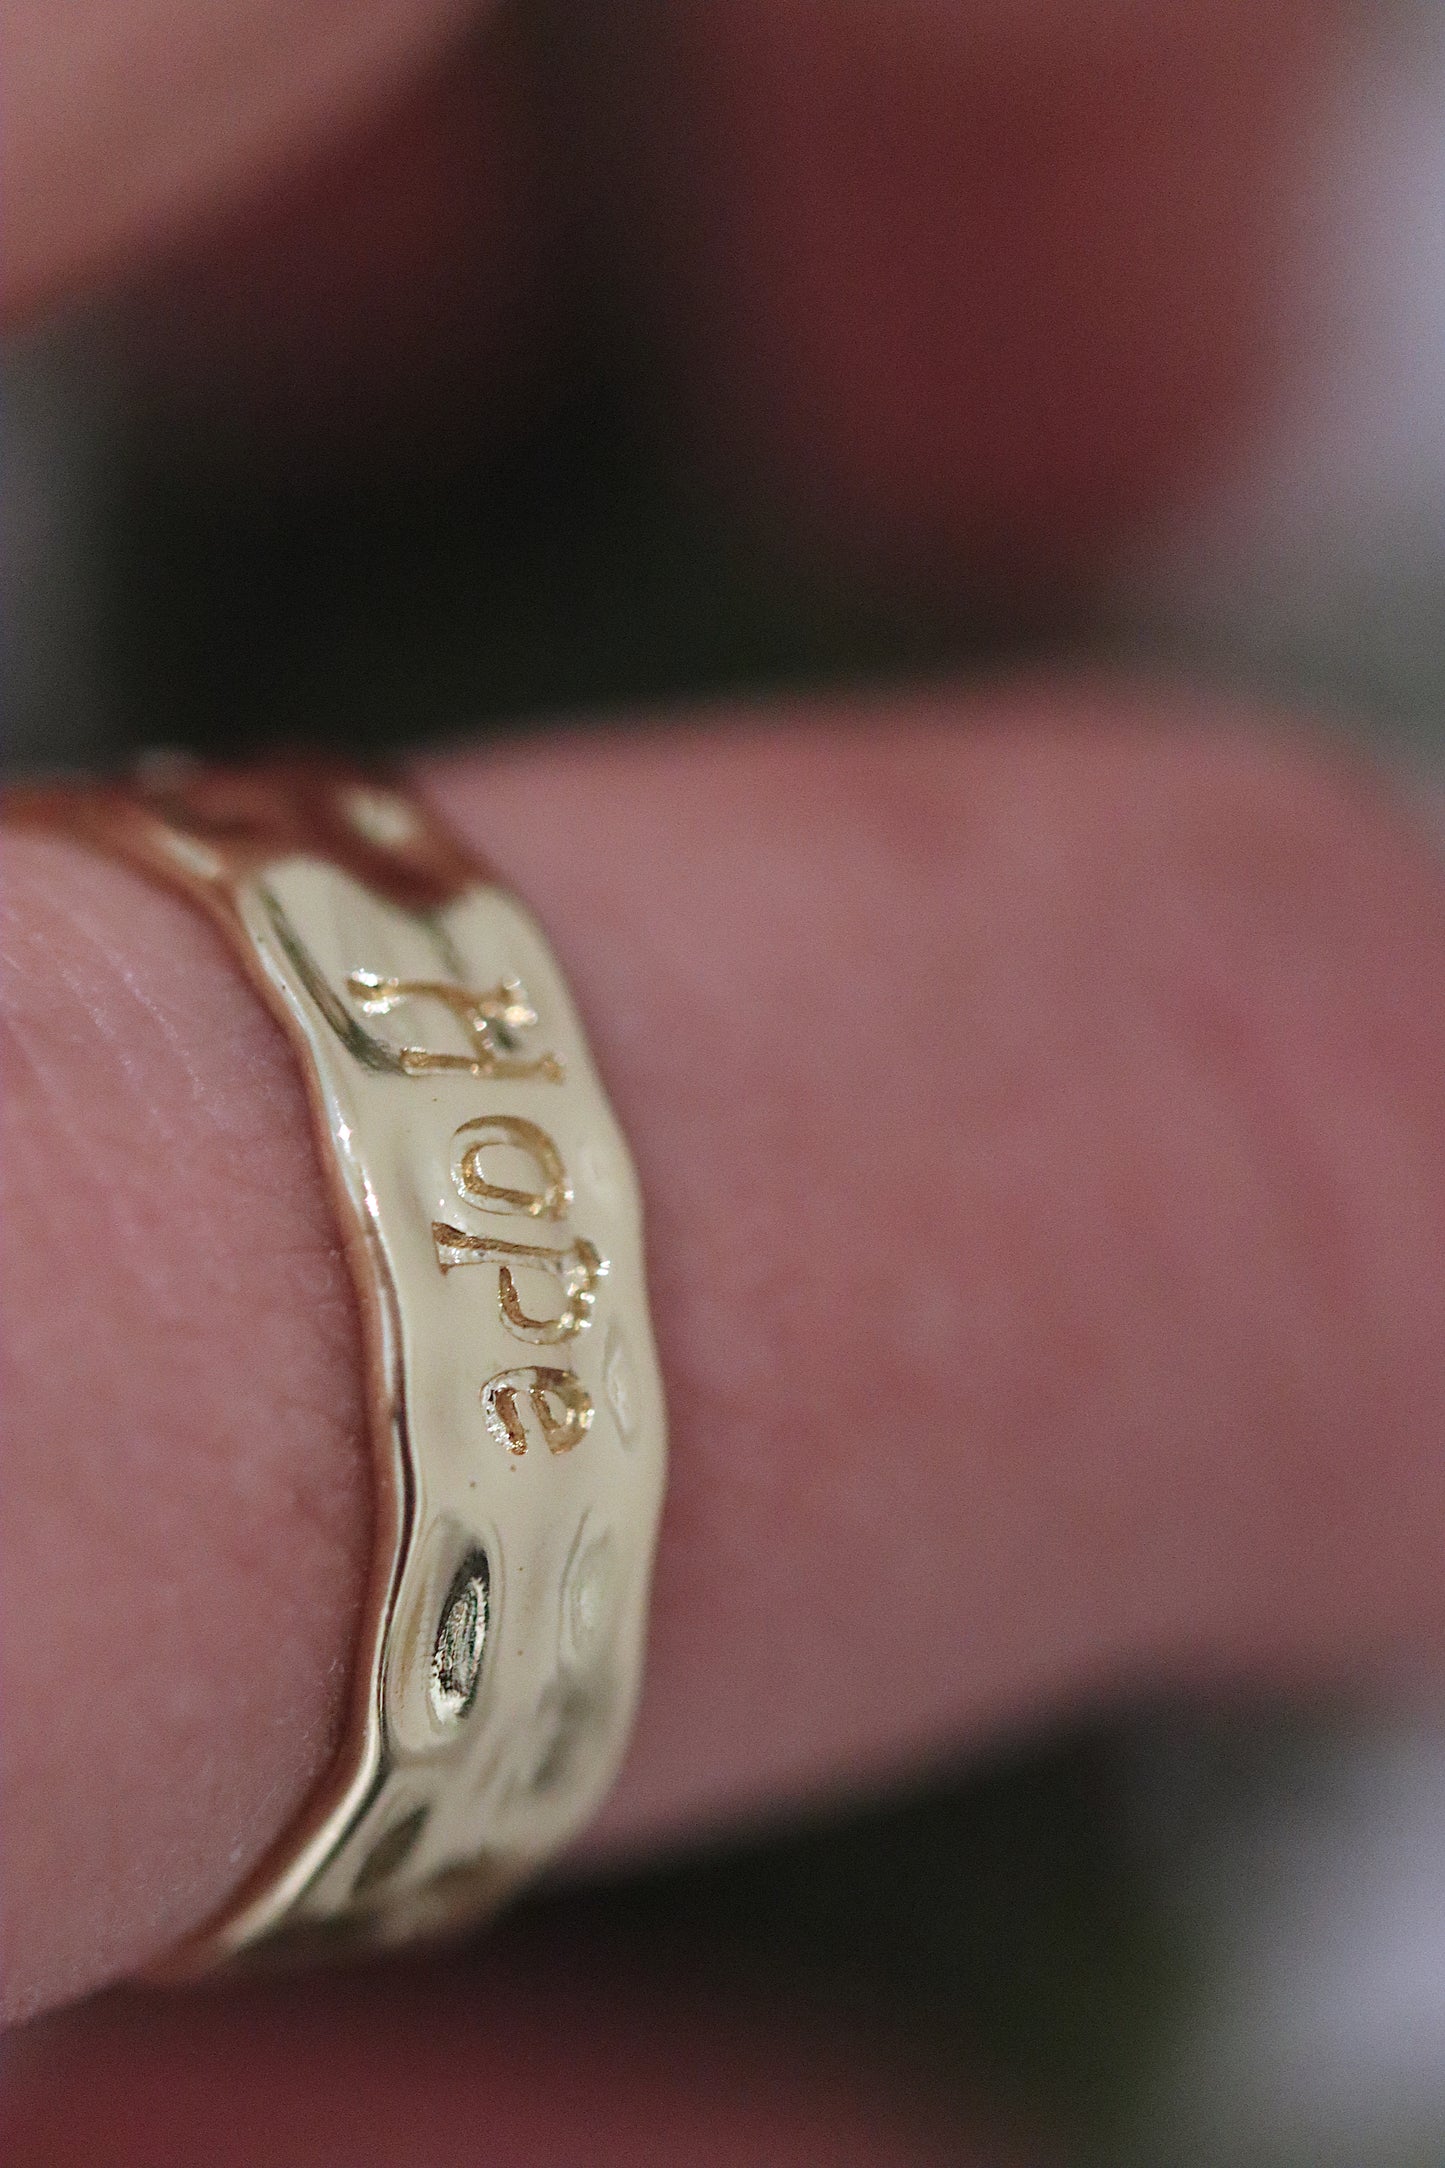 Gold Plated 'Hope' Ring